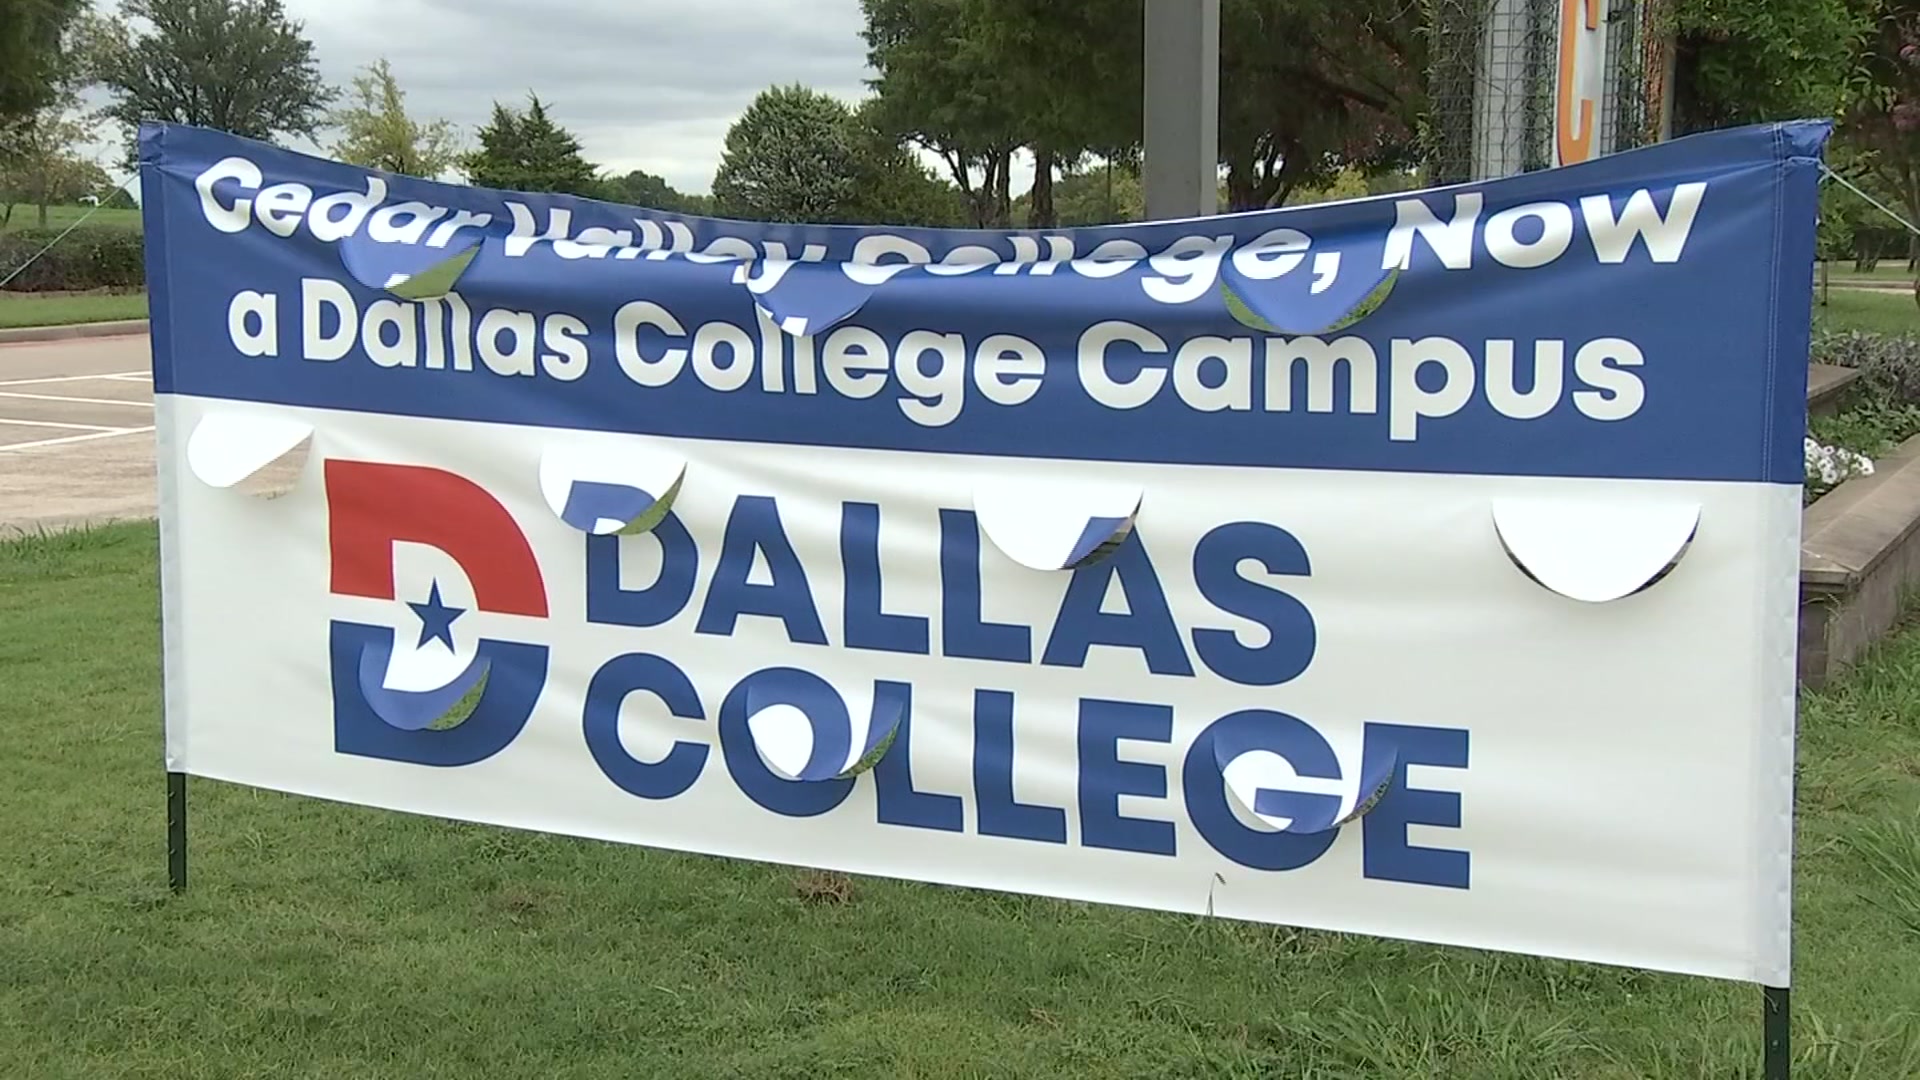 Introducing Dallas College: DCCCD Gets Single Accreditation Approval